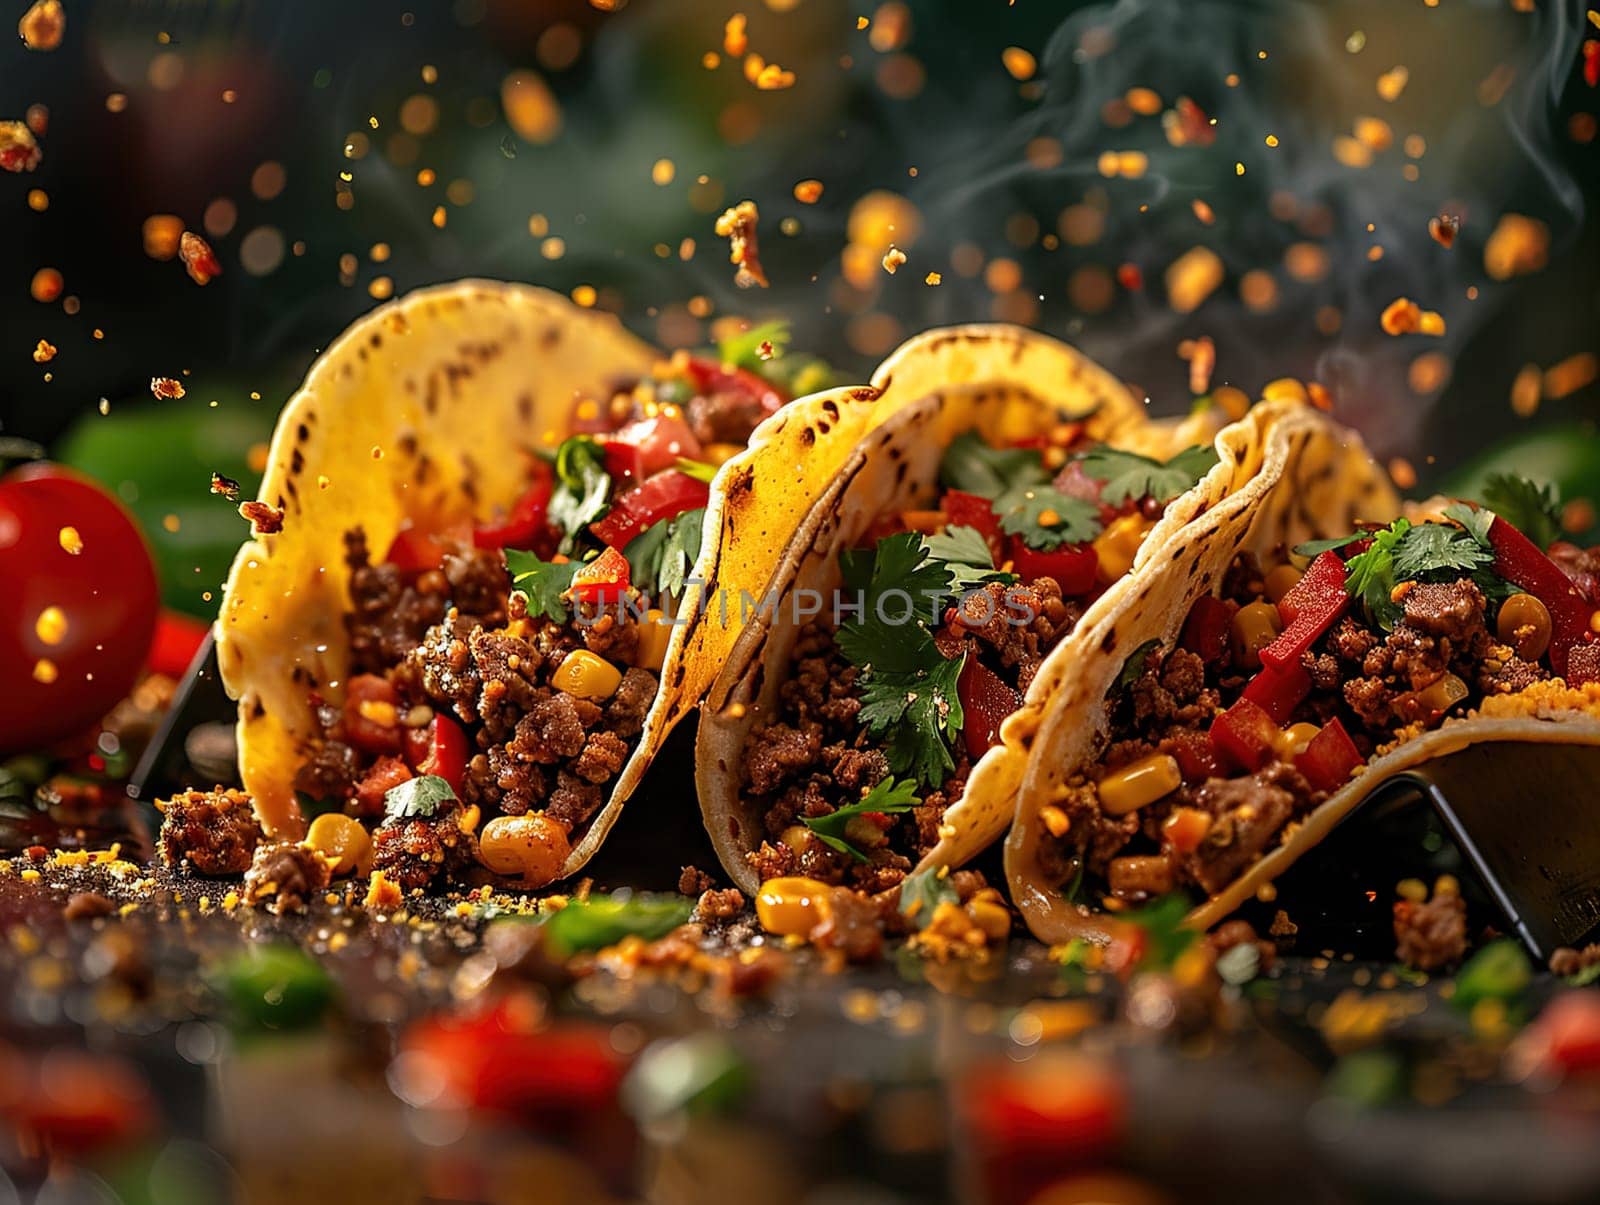 Quesadillas or nachos. Mexican dish with tortillas. Delicious quesadillas photography, explosion flavors, studio lighting, studio background, well-lit, vibrant colors, sharp-focus